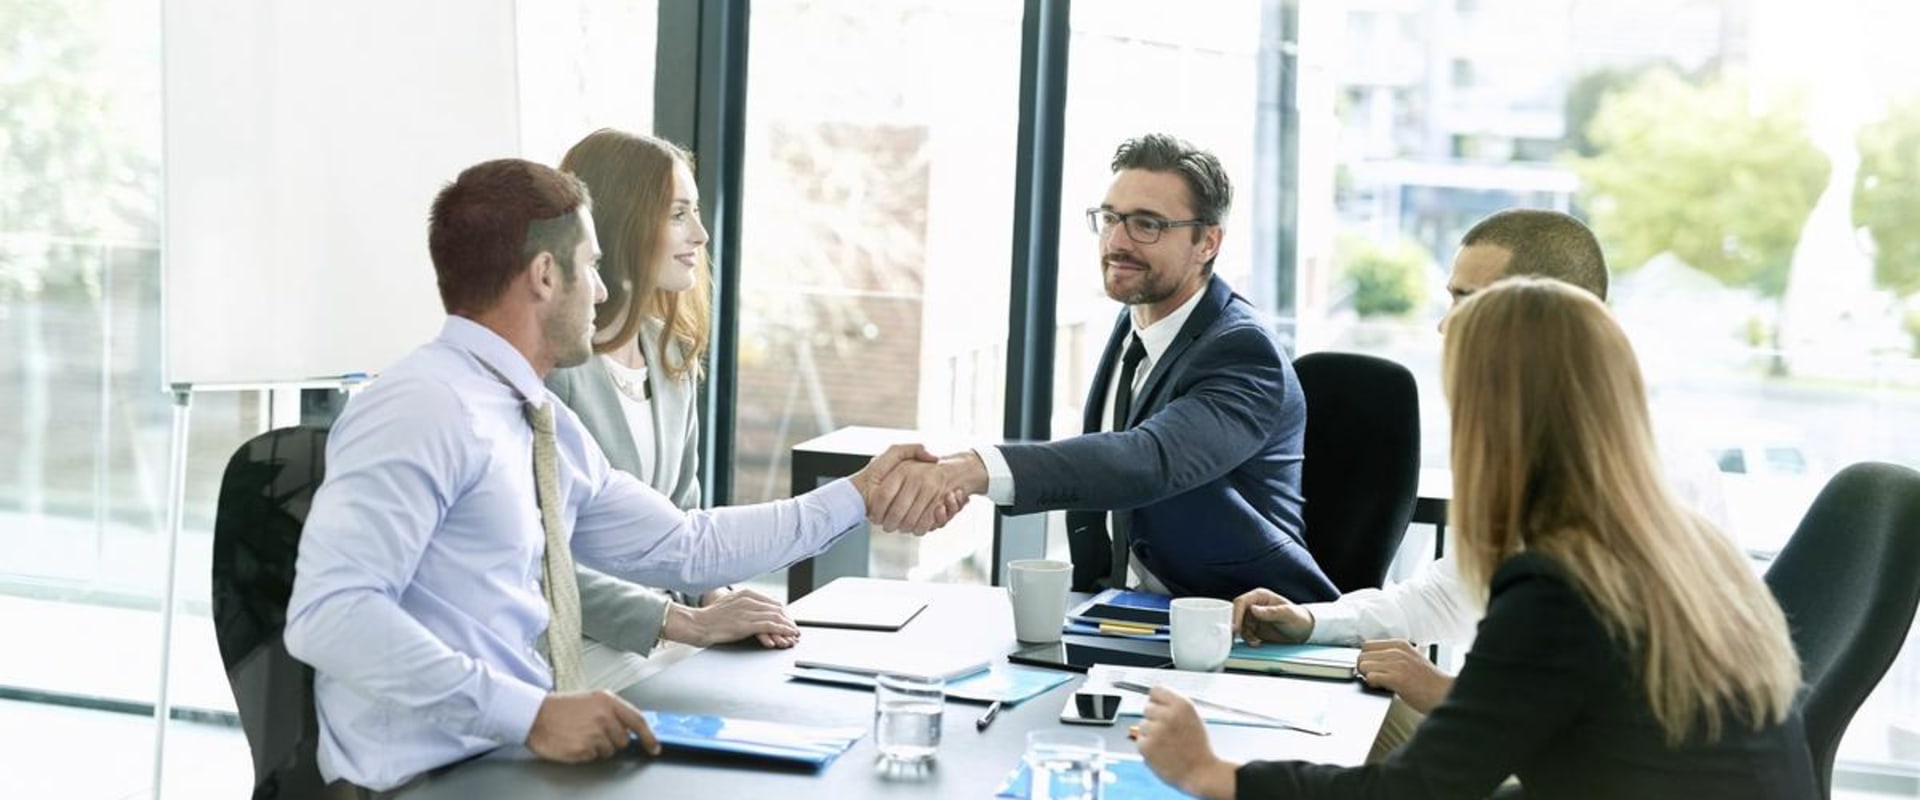 What strategies should entrepreneurs use when negotiating contracts and deals with partners and vendors?